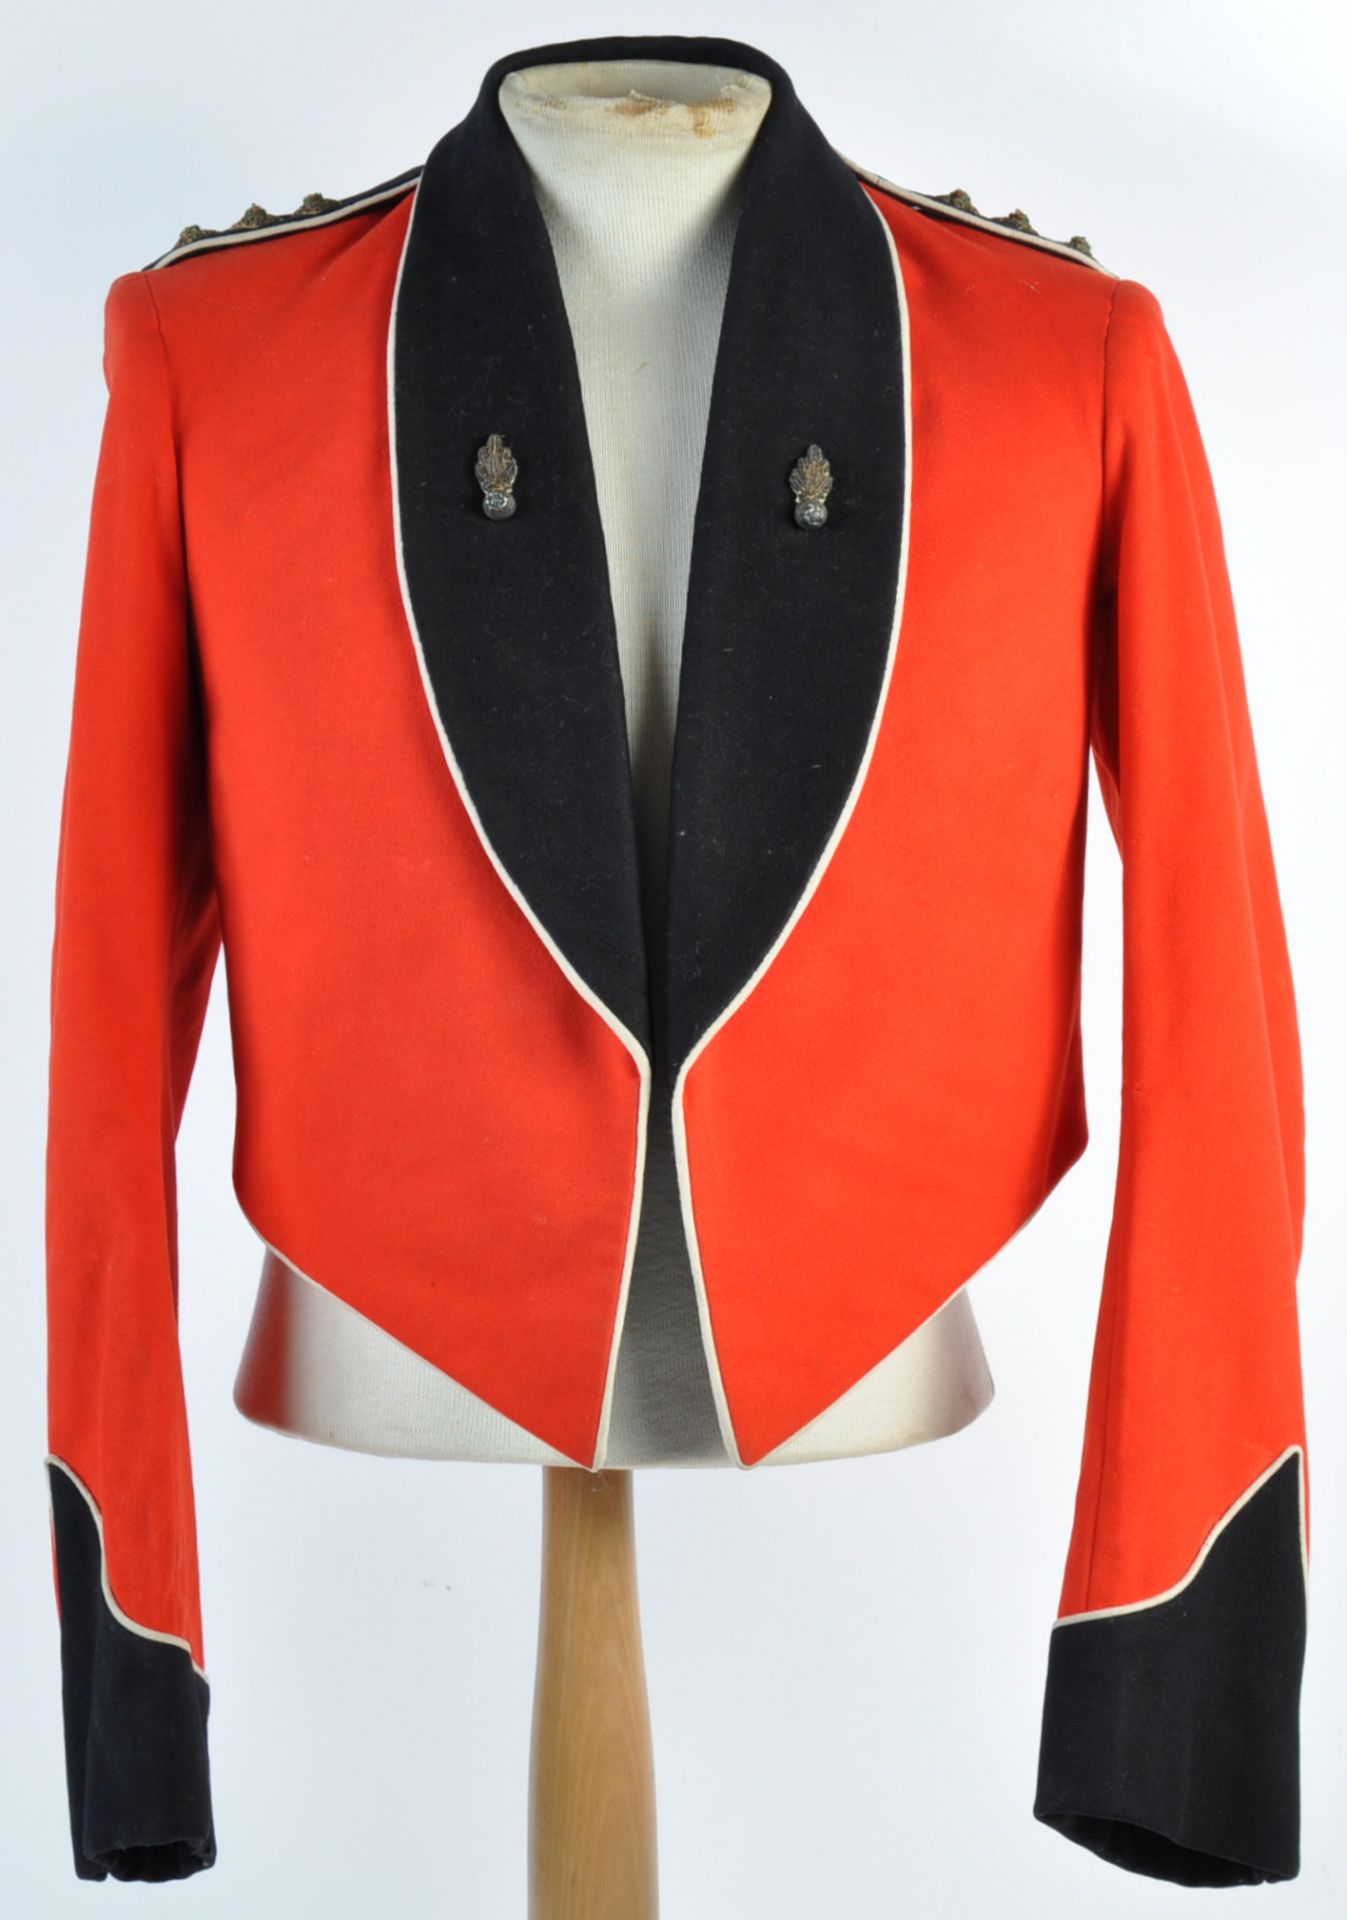 EARLY 20TH CENTURY ROYAL FUSILIERS CAPTAIN'S MESS JACKET